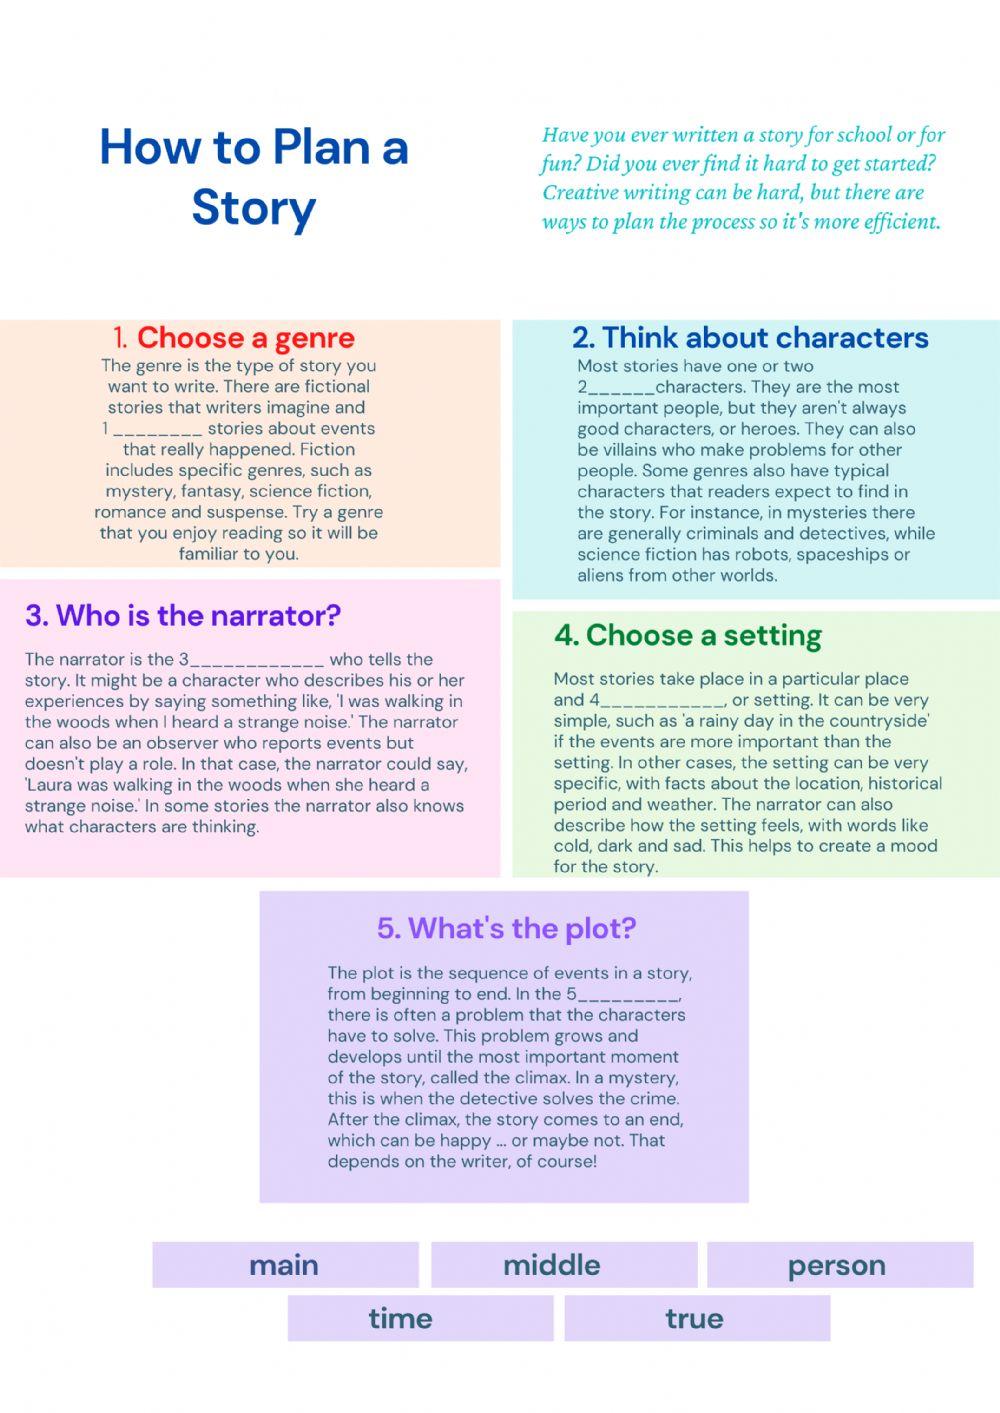 How to plan a story